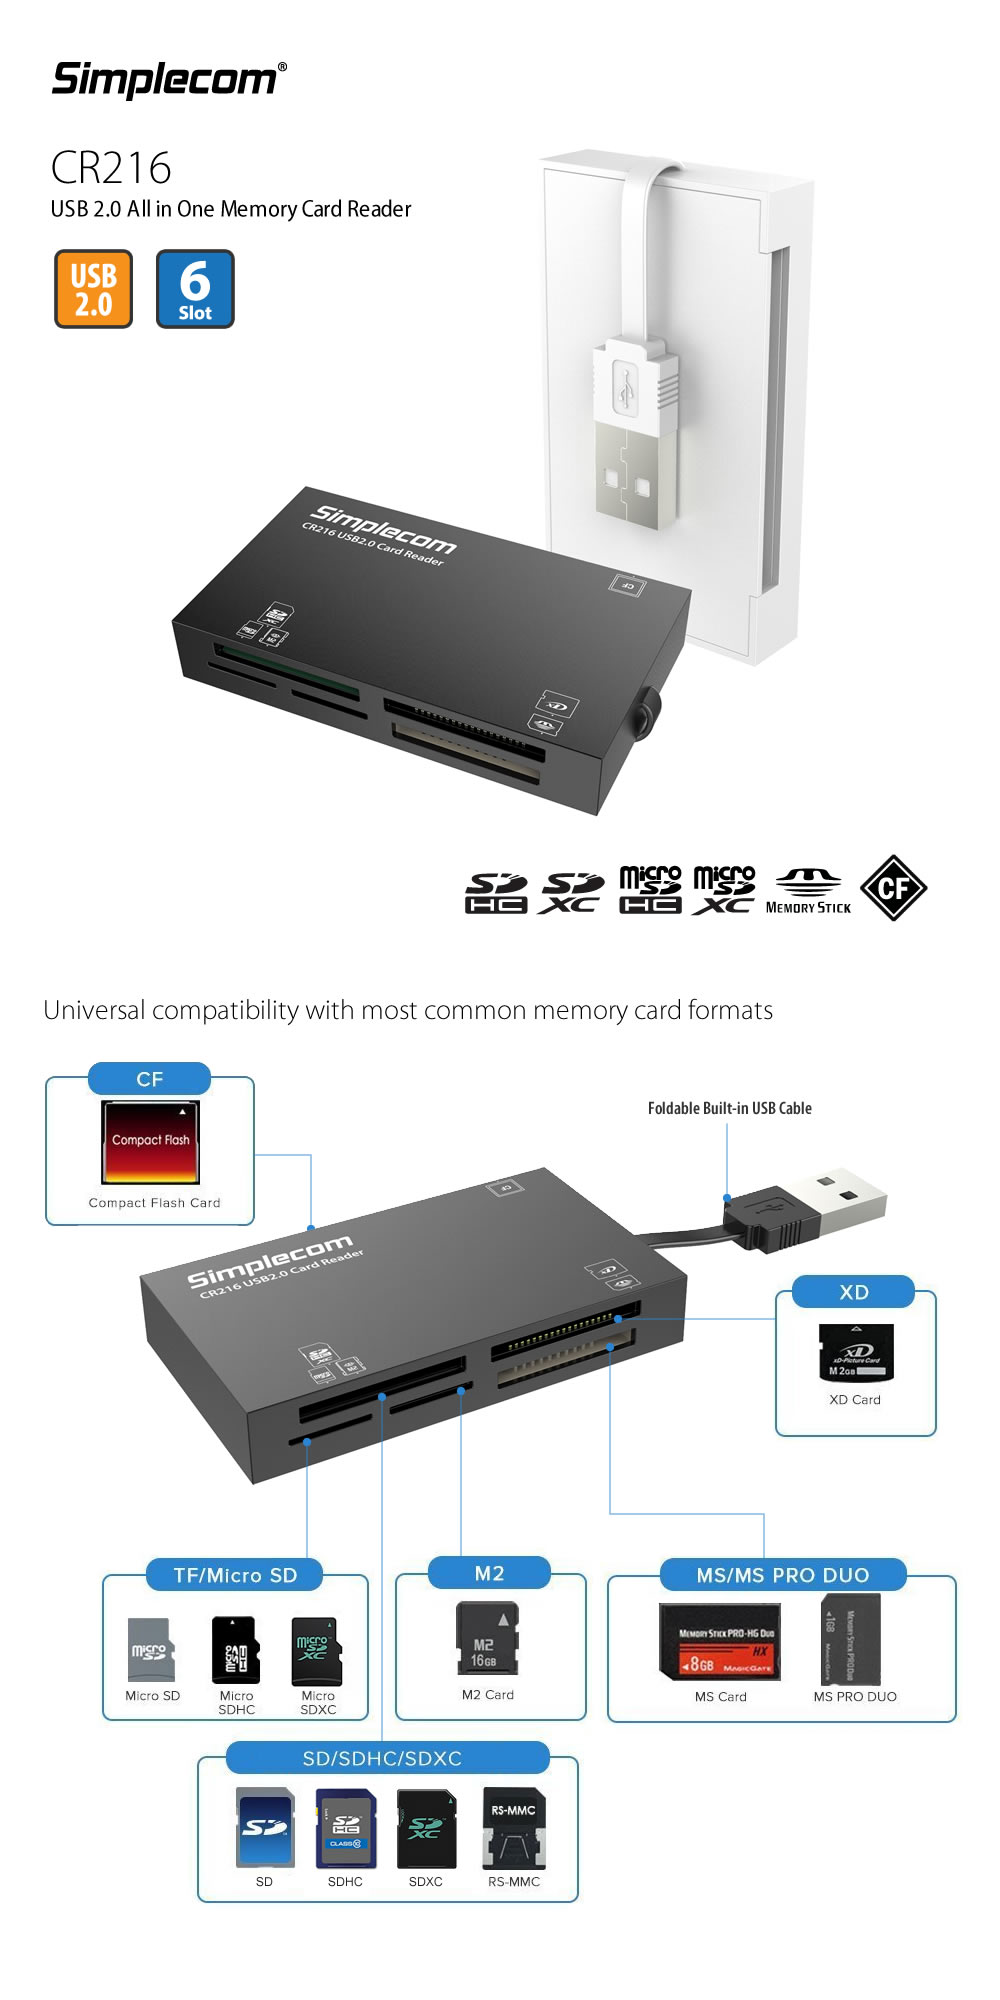 Simplecom CR216 USB 2.0 All in One Memory Card Reader 6 Slot for MS M2 CF XD Micro SD HC SDXC White 1